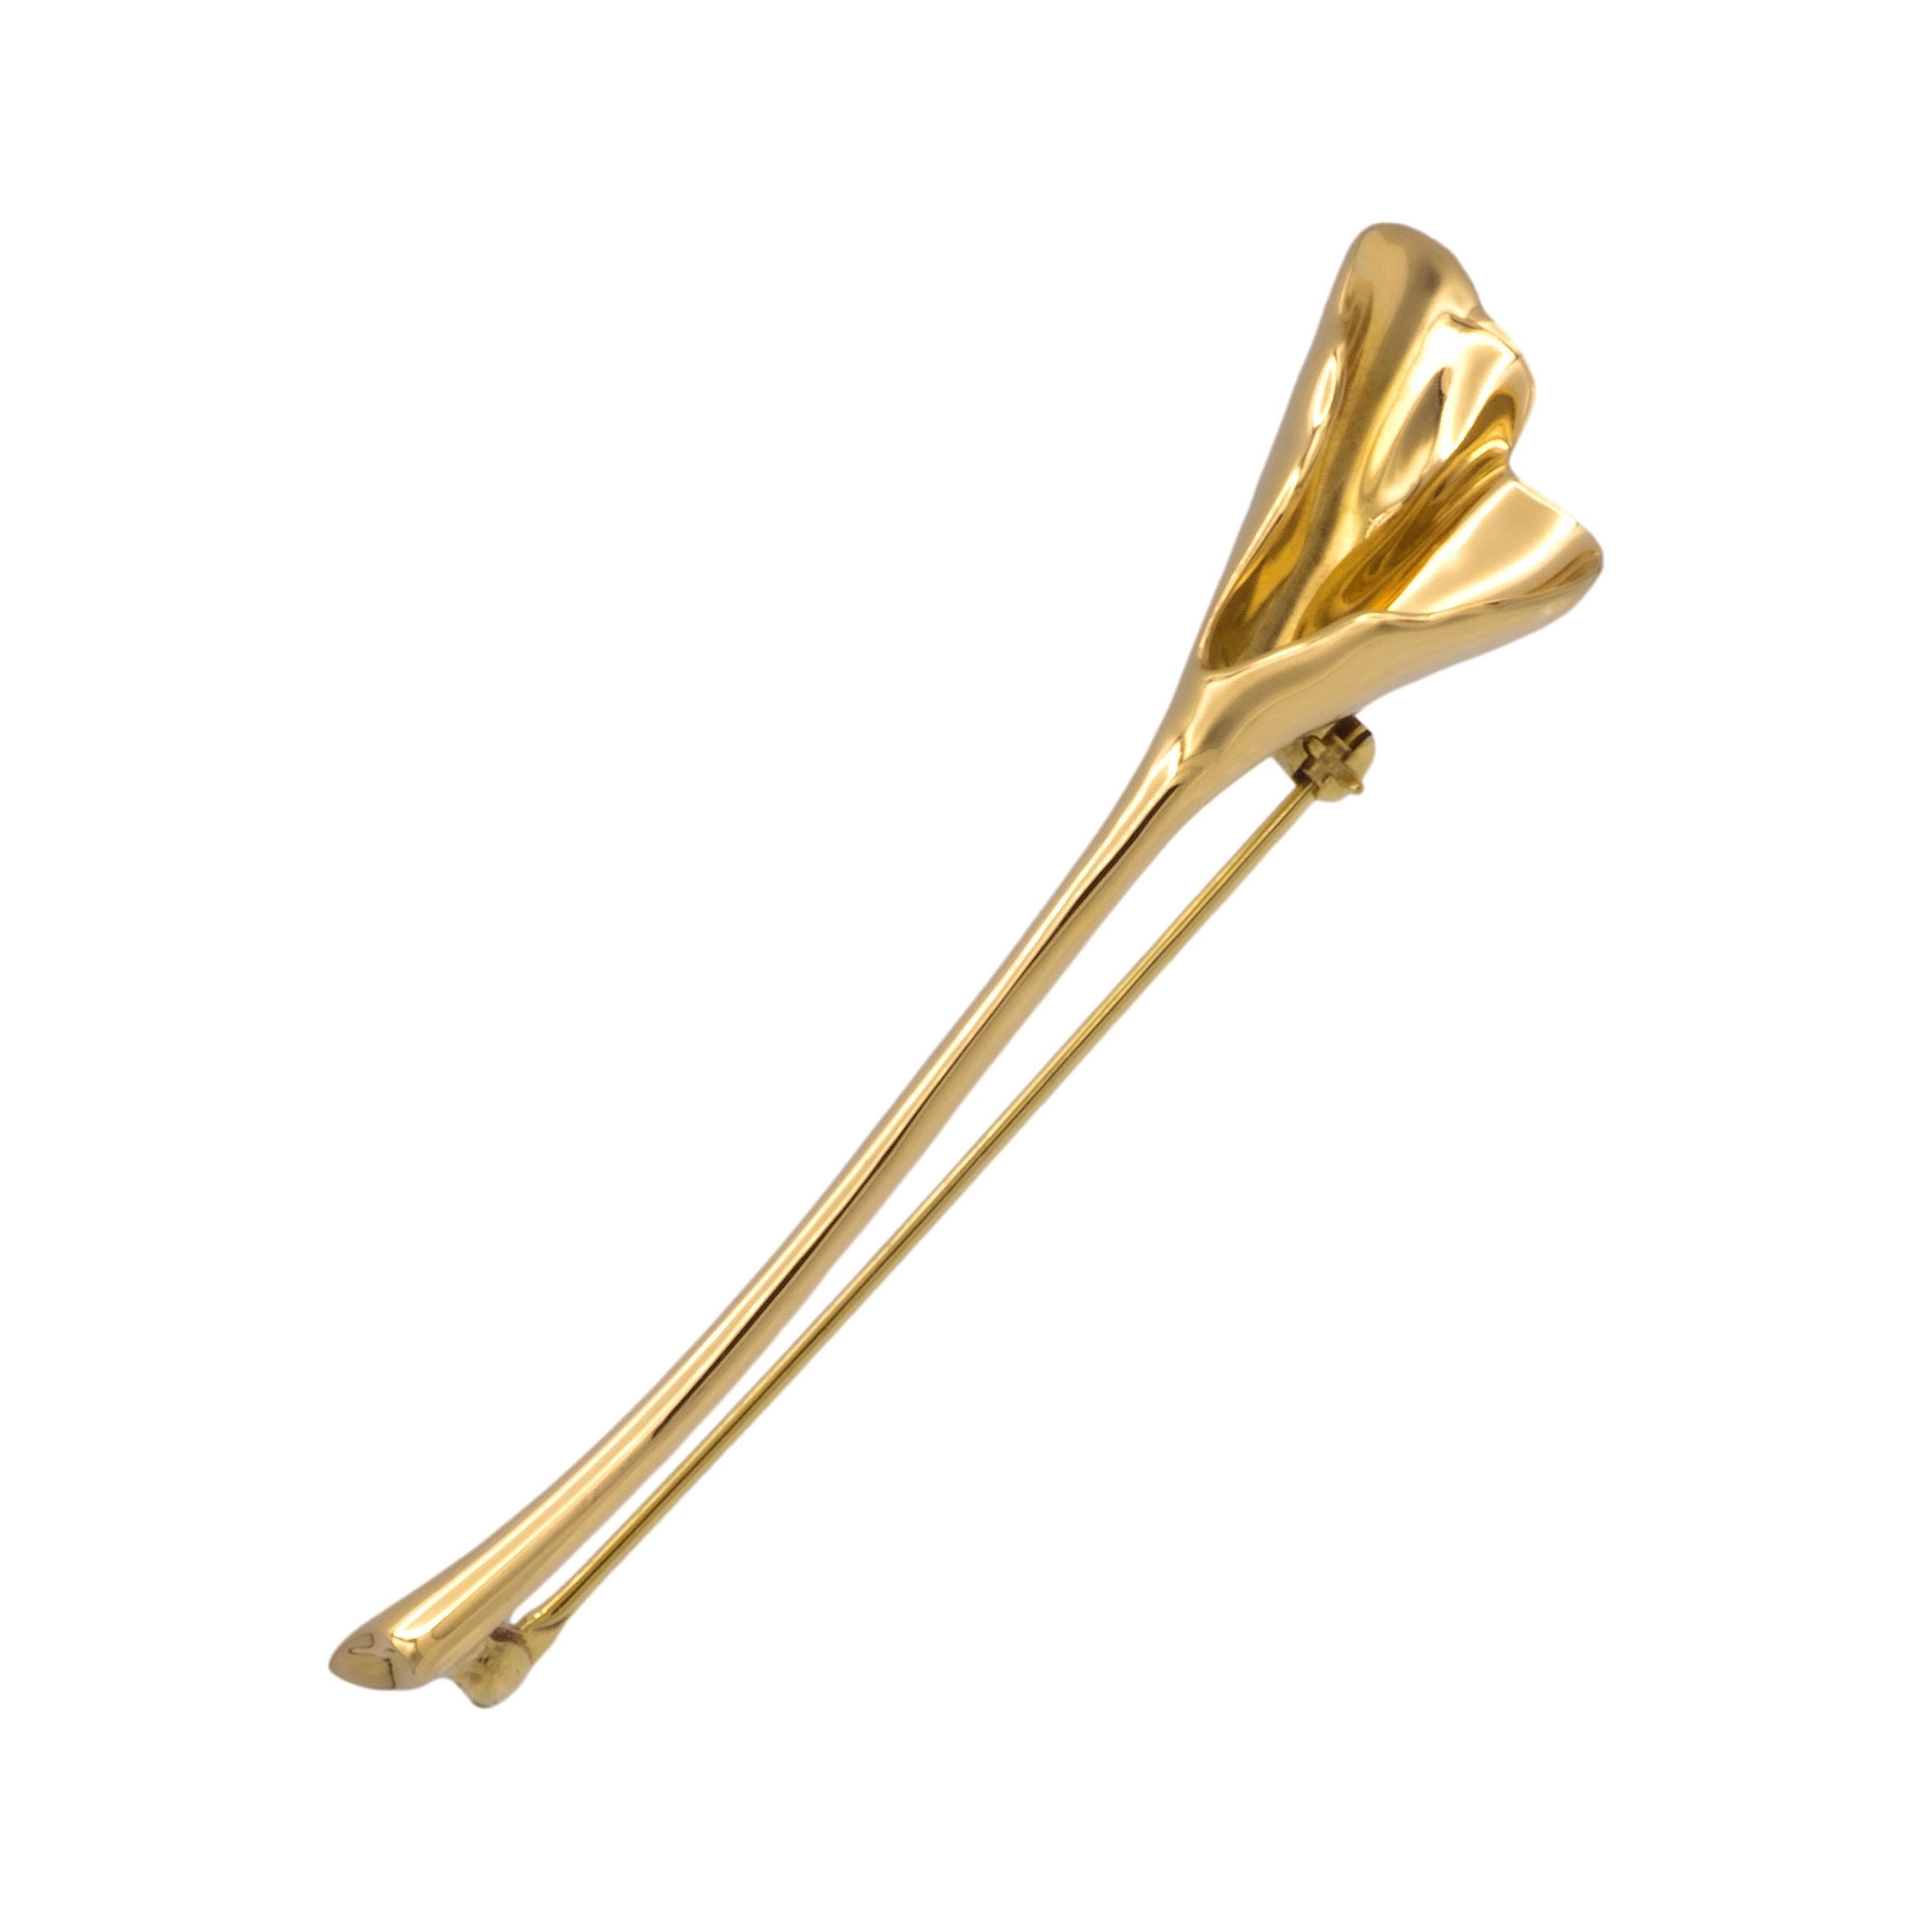 Vintage Tiffany & Co. Cala Lily flower brooch finely crafted in 18 karat yellow gold . This brooch has a stick pin closure and was manufactured in the year 1960. Fully hallmarked with logo and metal content.  

Brooch Specifications
Brand: Tiffany &